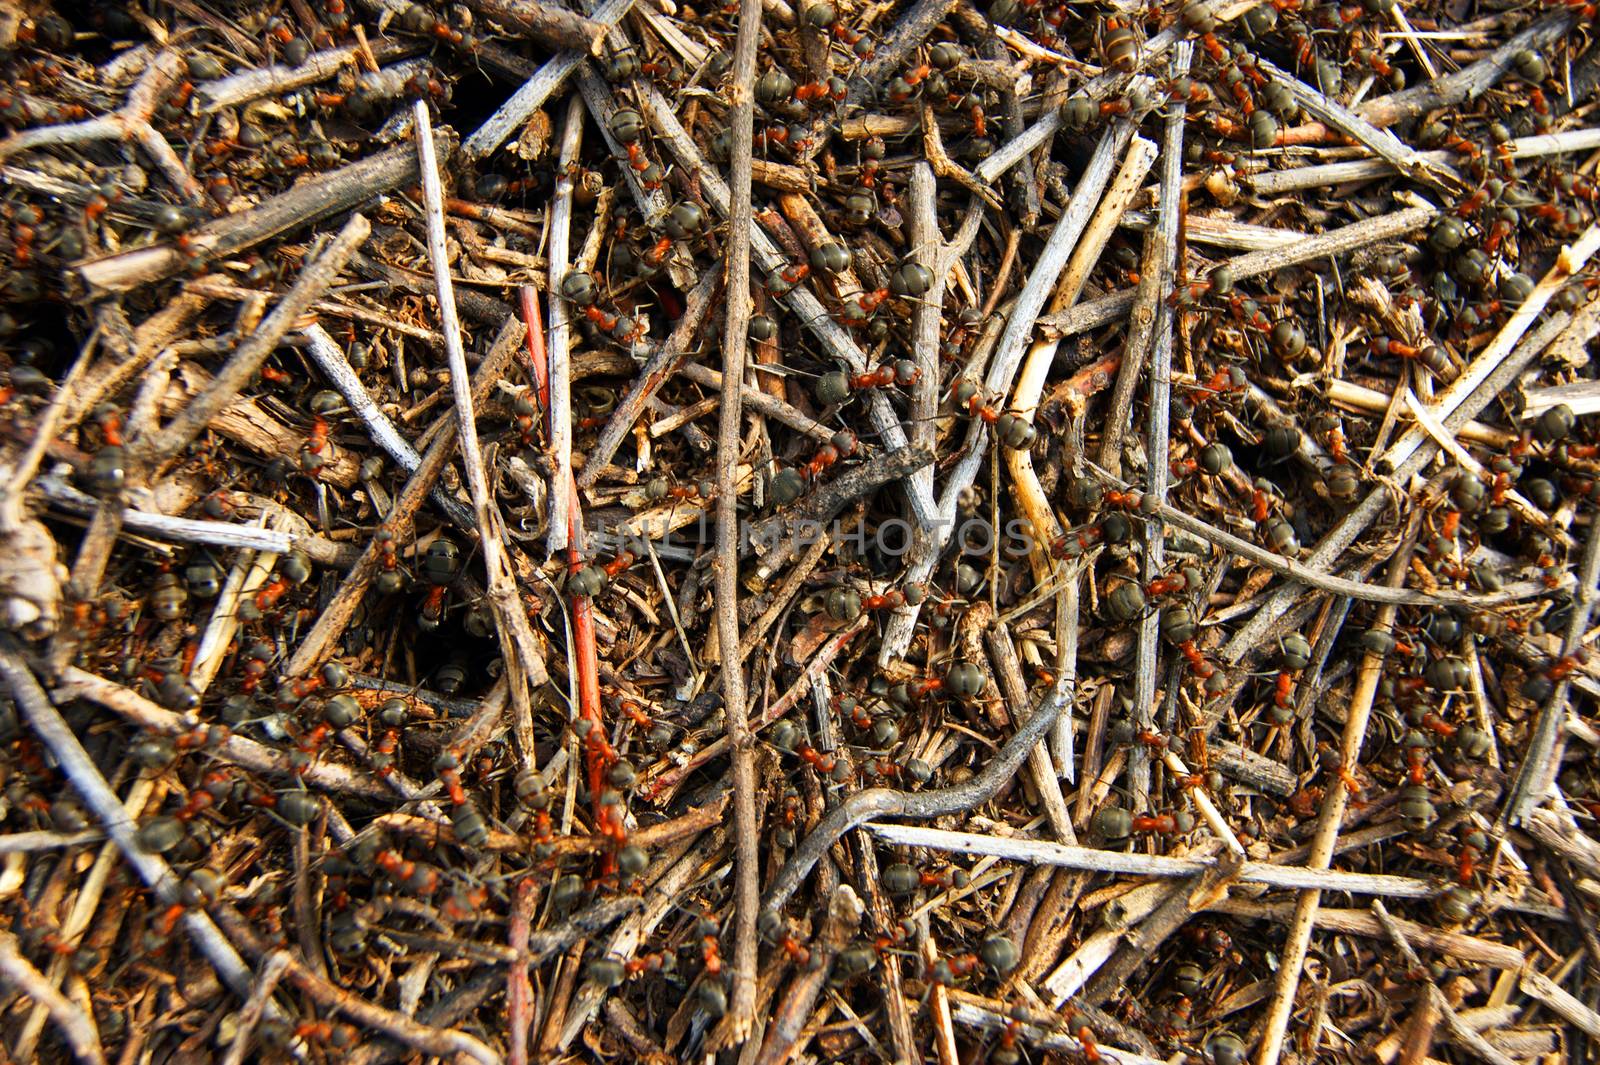 Much small ants in its house anthill by cobol1964